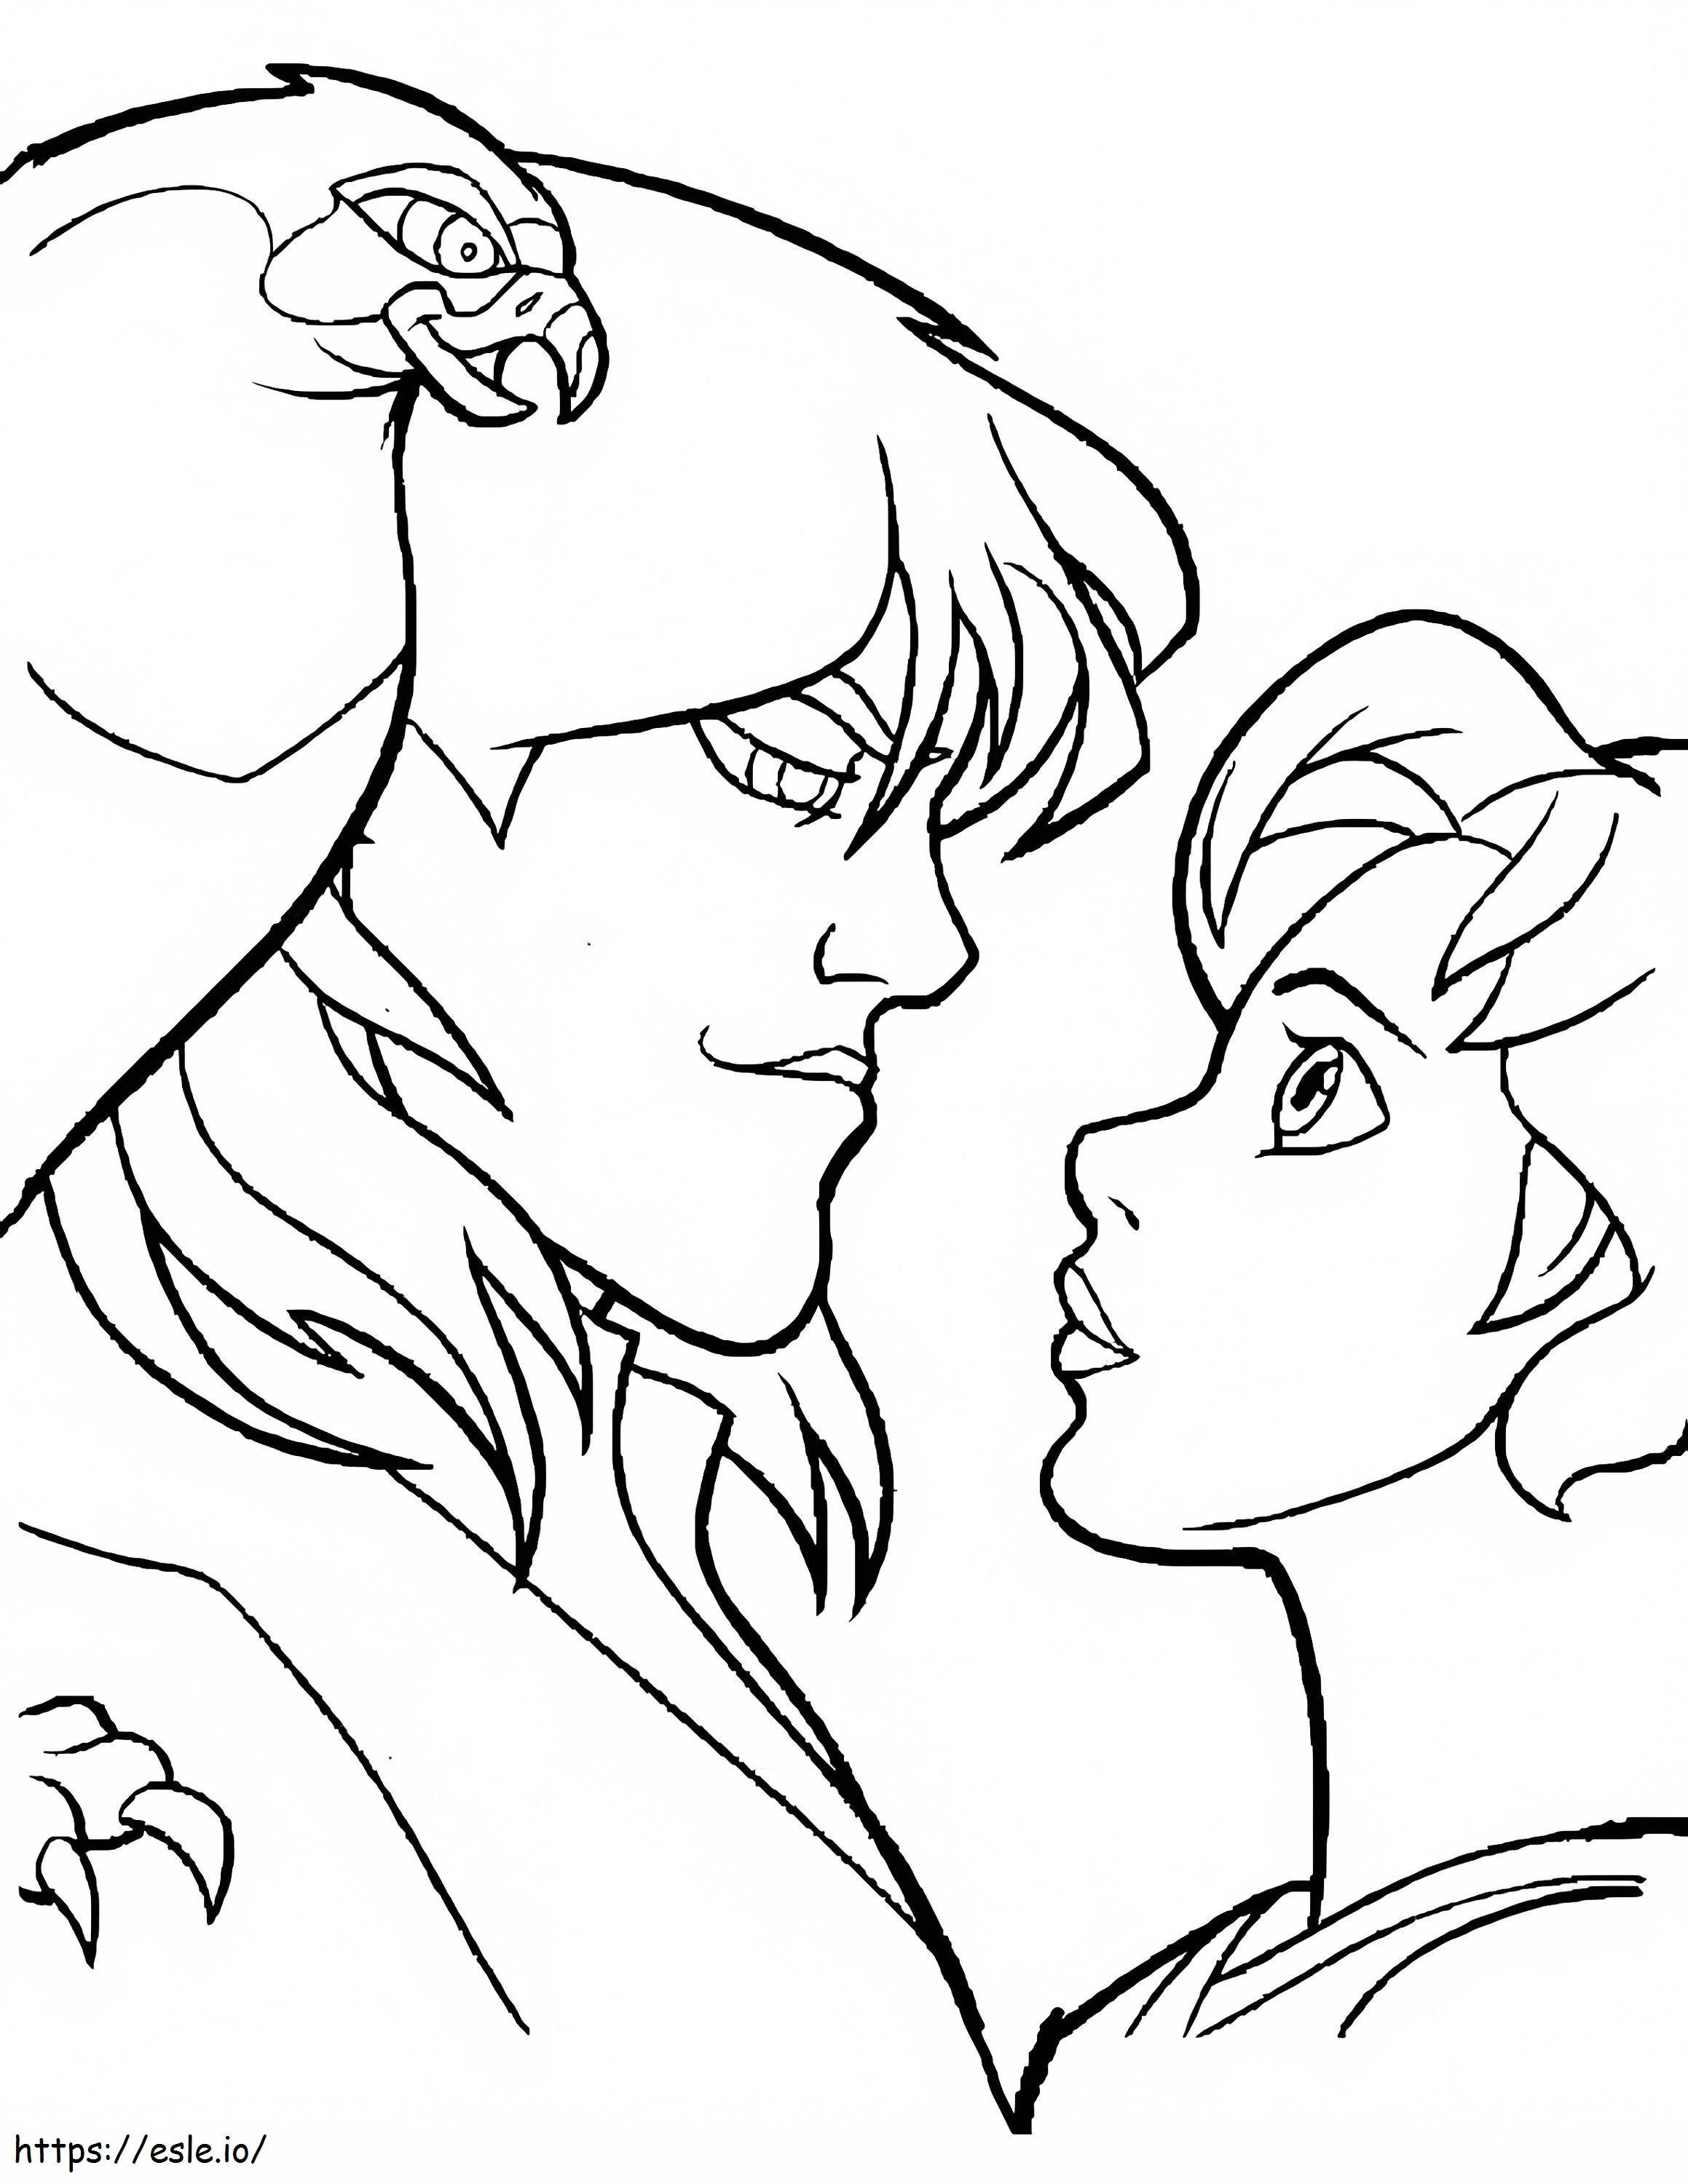 Quest For Camelot 16 coloring page